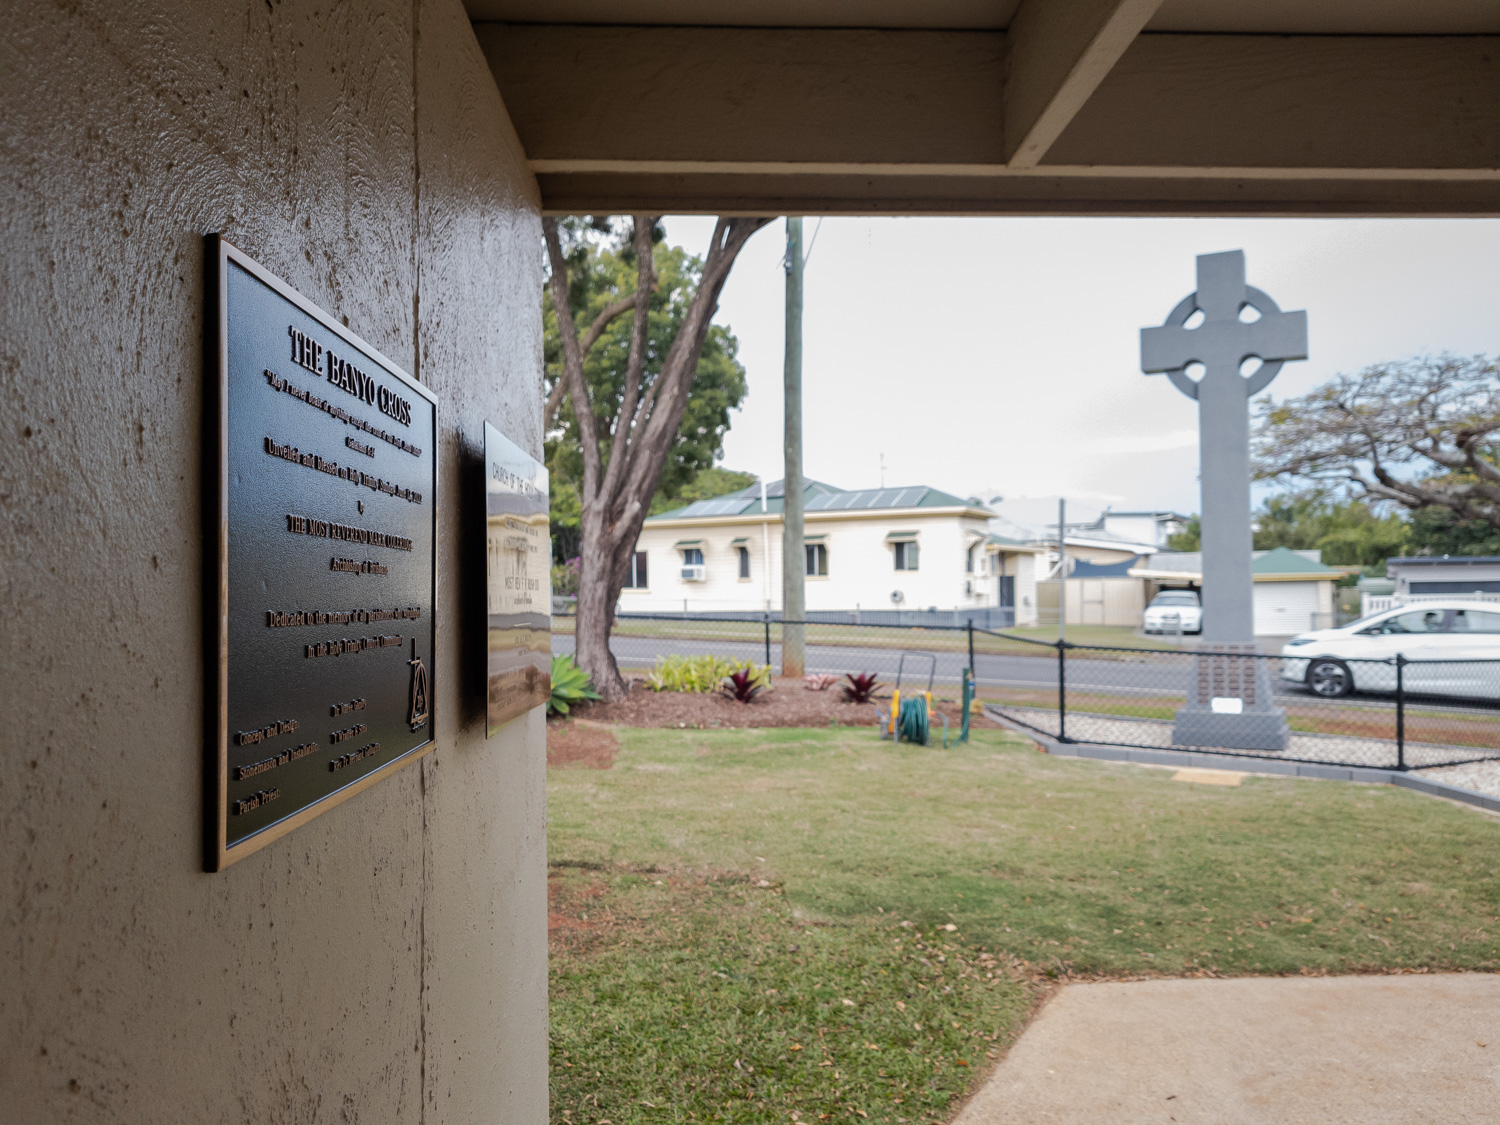 Commemorative bronze and brass plaques with the finished granite cross in the background.